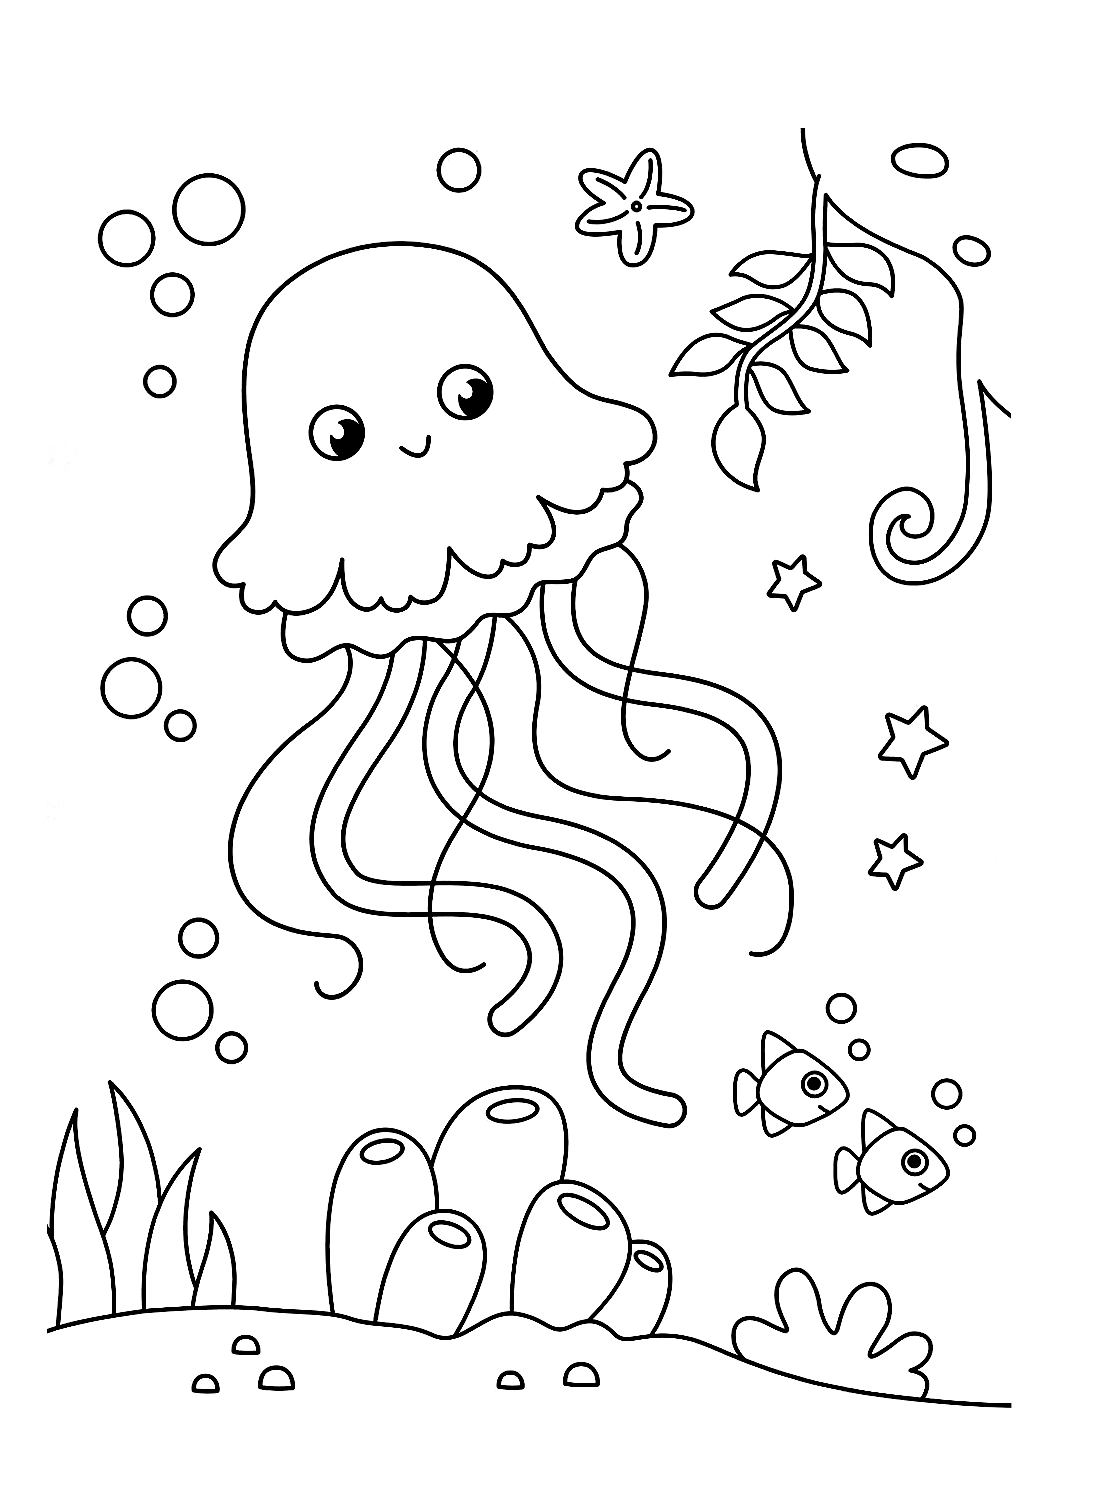 A cute Jellyfish from Jellyfish